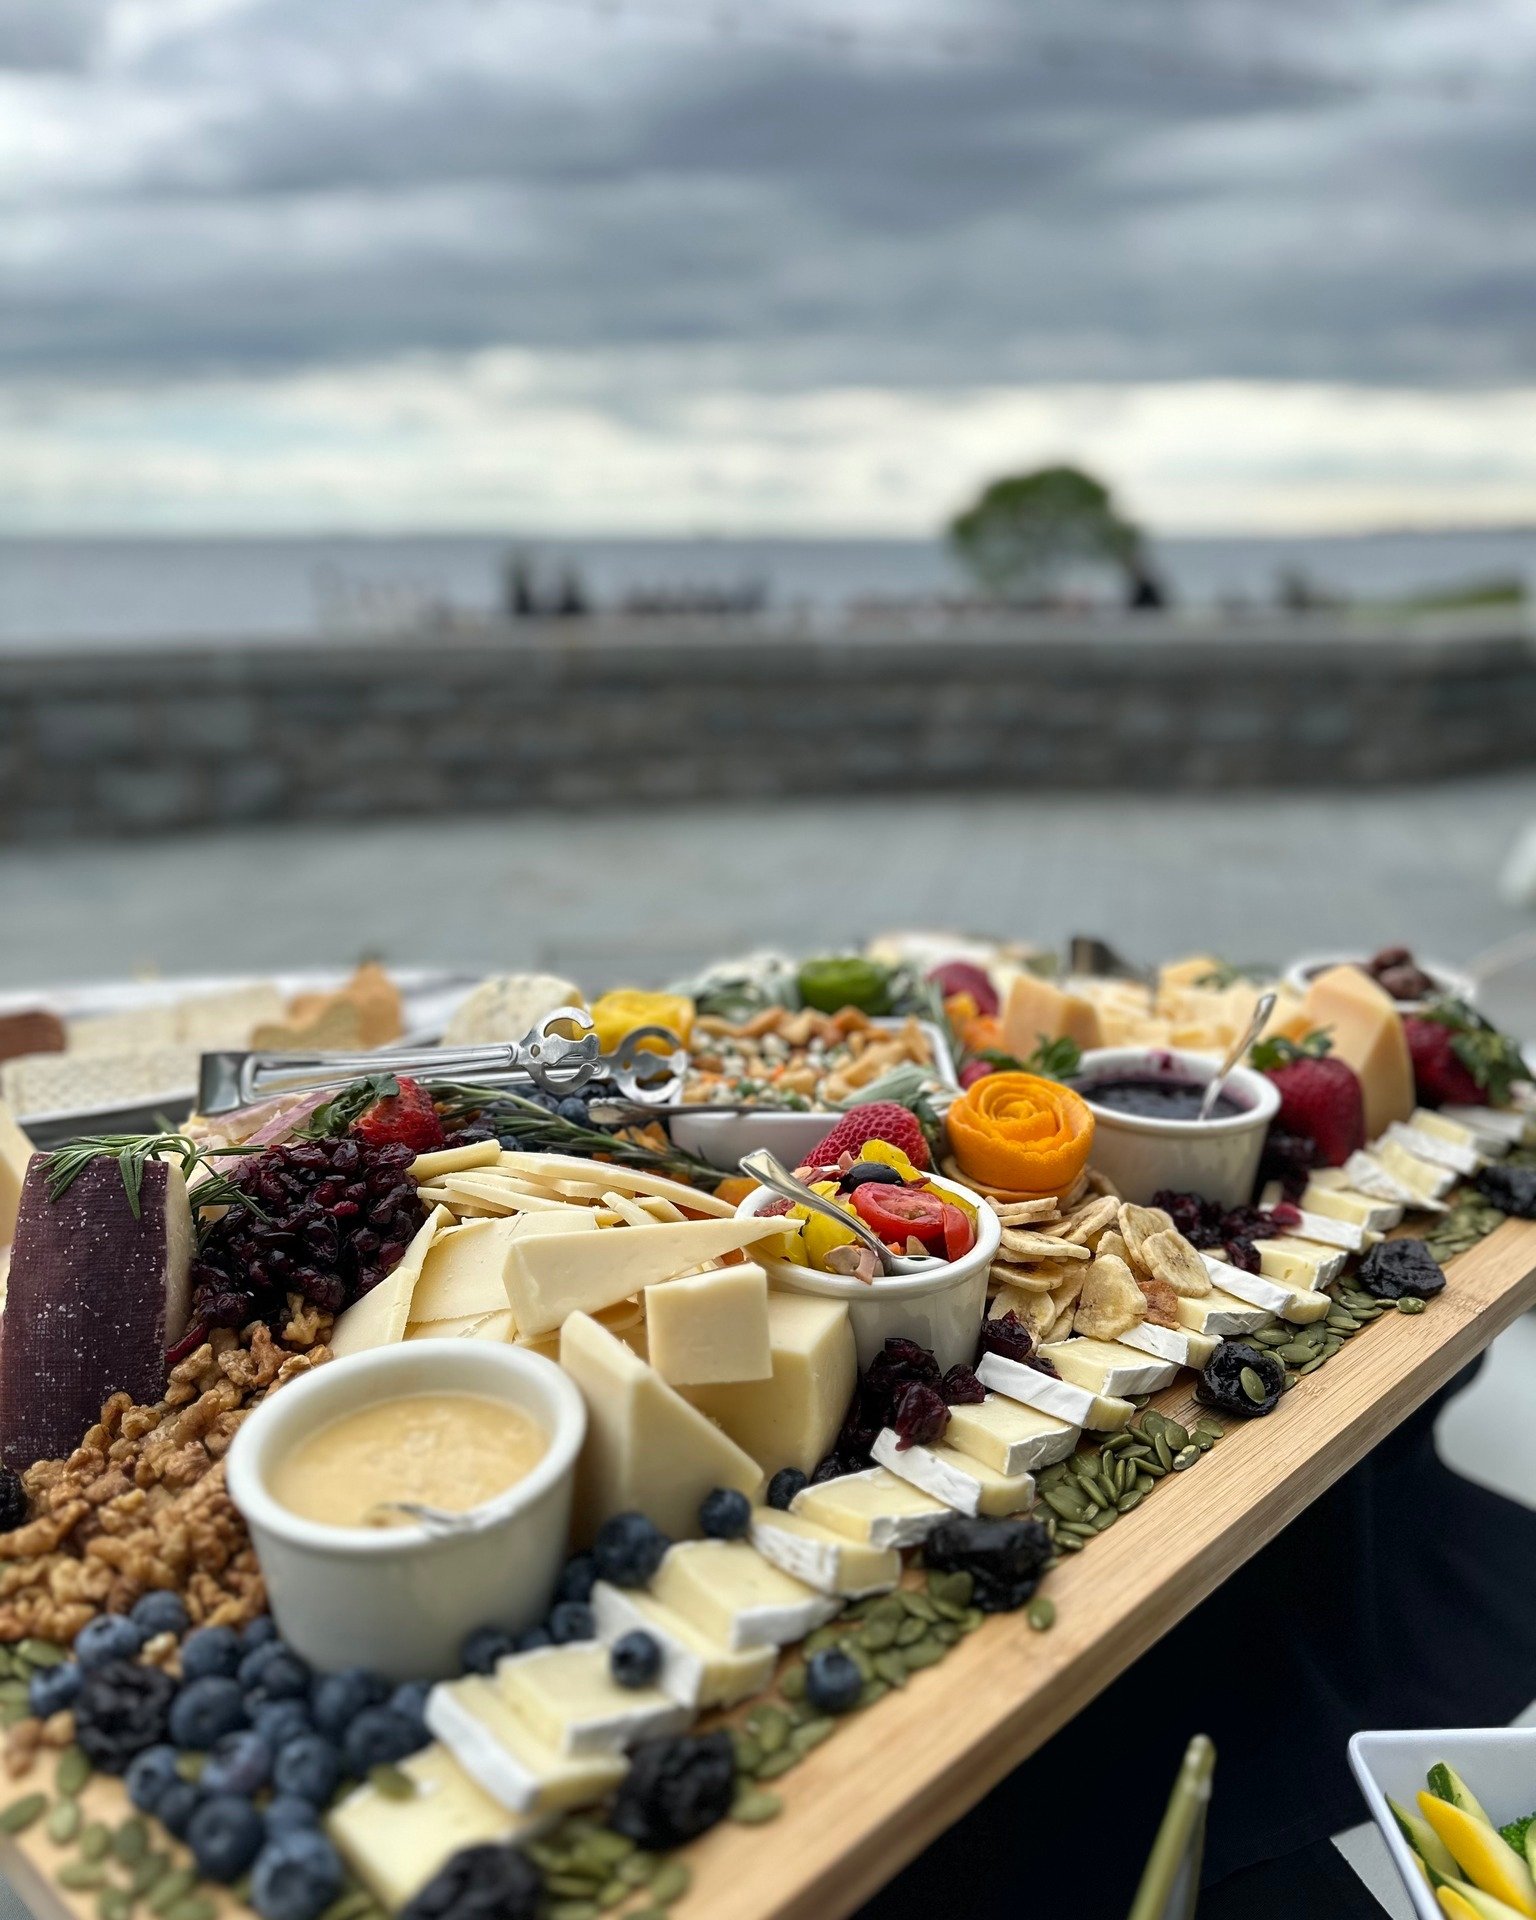 Wedding season is well underway and we had the honor of serving our delicious food, for an amazing couple, at their gorgeous wedding over the weekend while enjoying the views at the Branford House!

Have a wedding or event coming up?  Let us help!

2